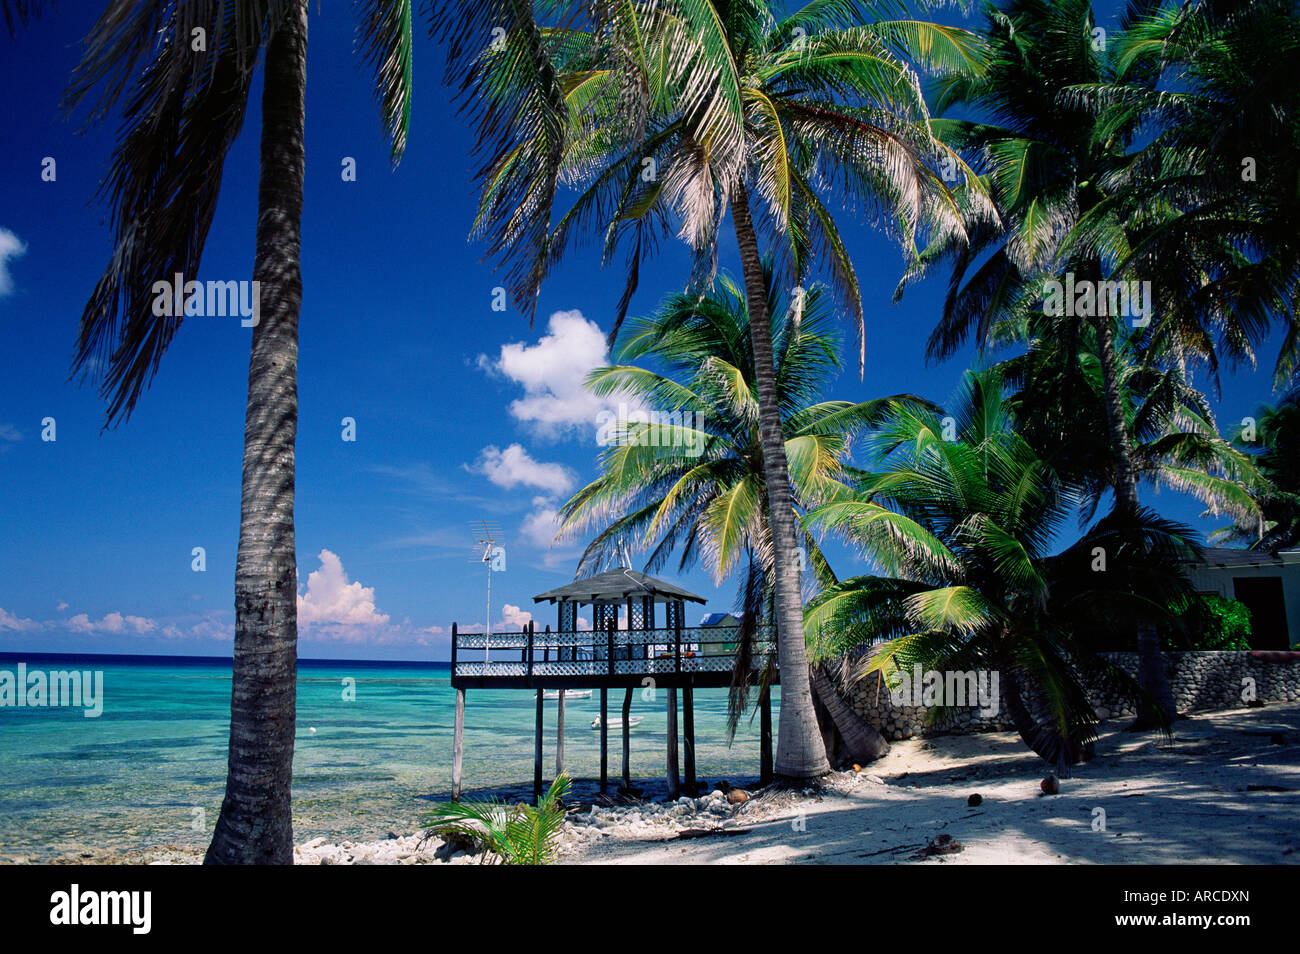 Waterside restaurant beneath palms, Old Man Bay, Grand Cayman, Cayman Islands, West Indies, Caribbean, Central America Stock Photo